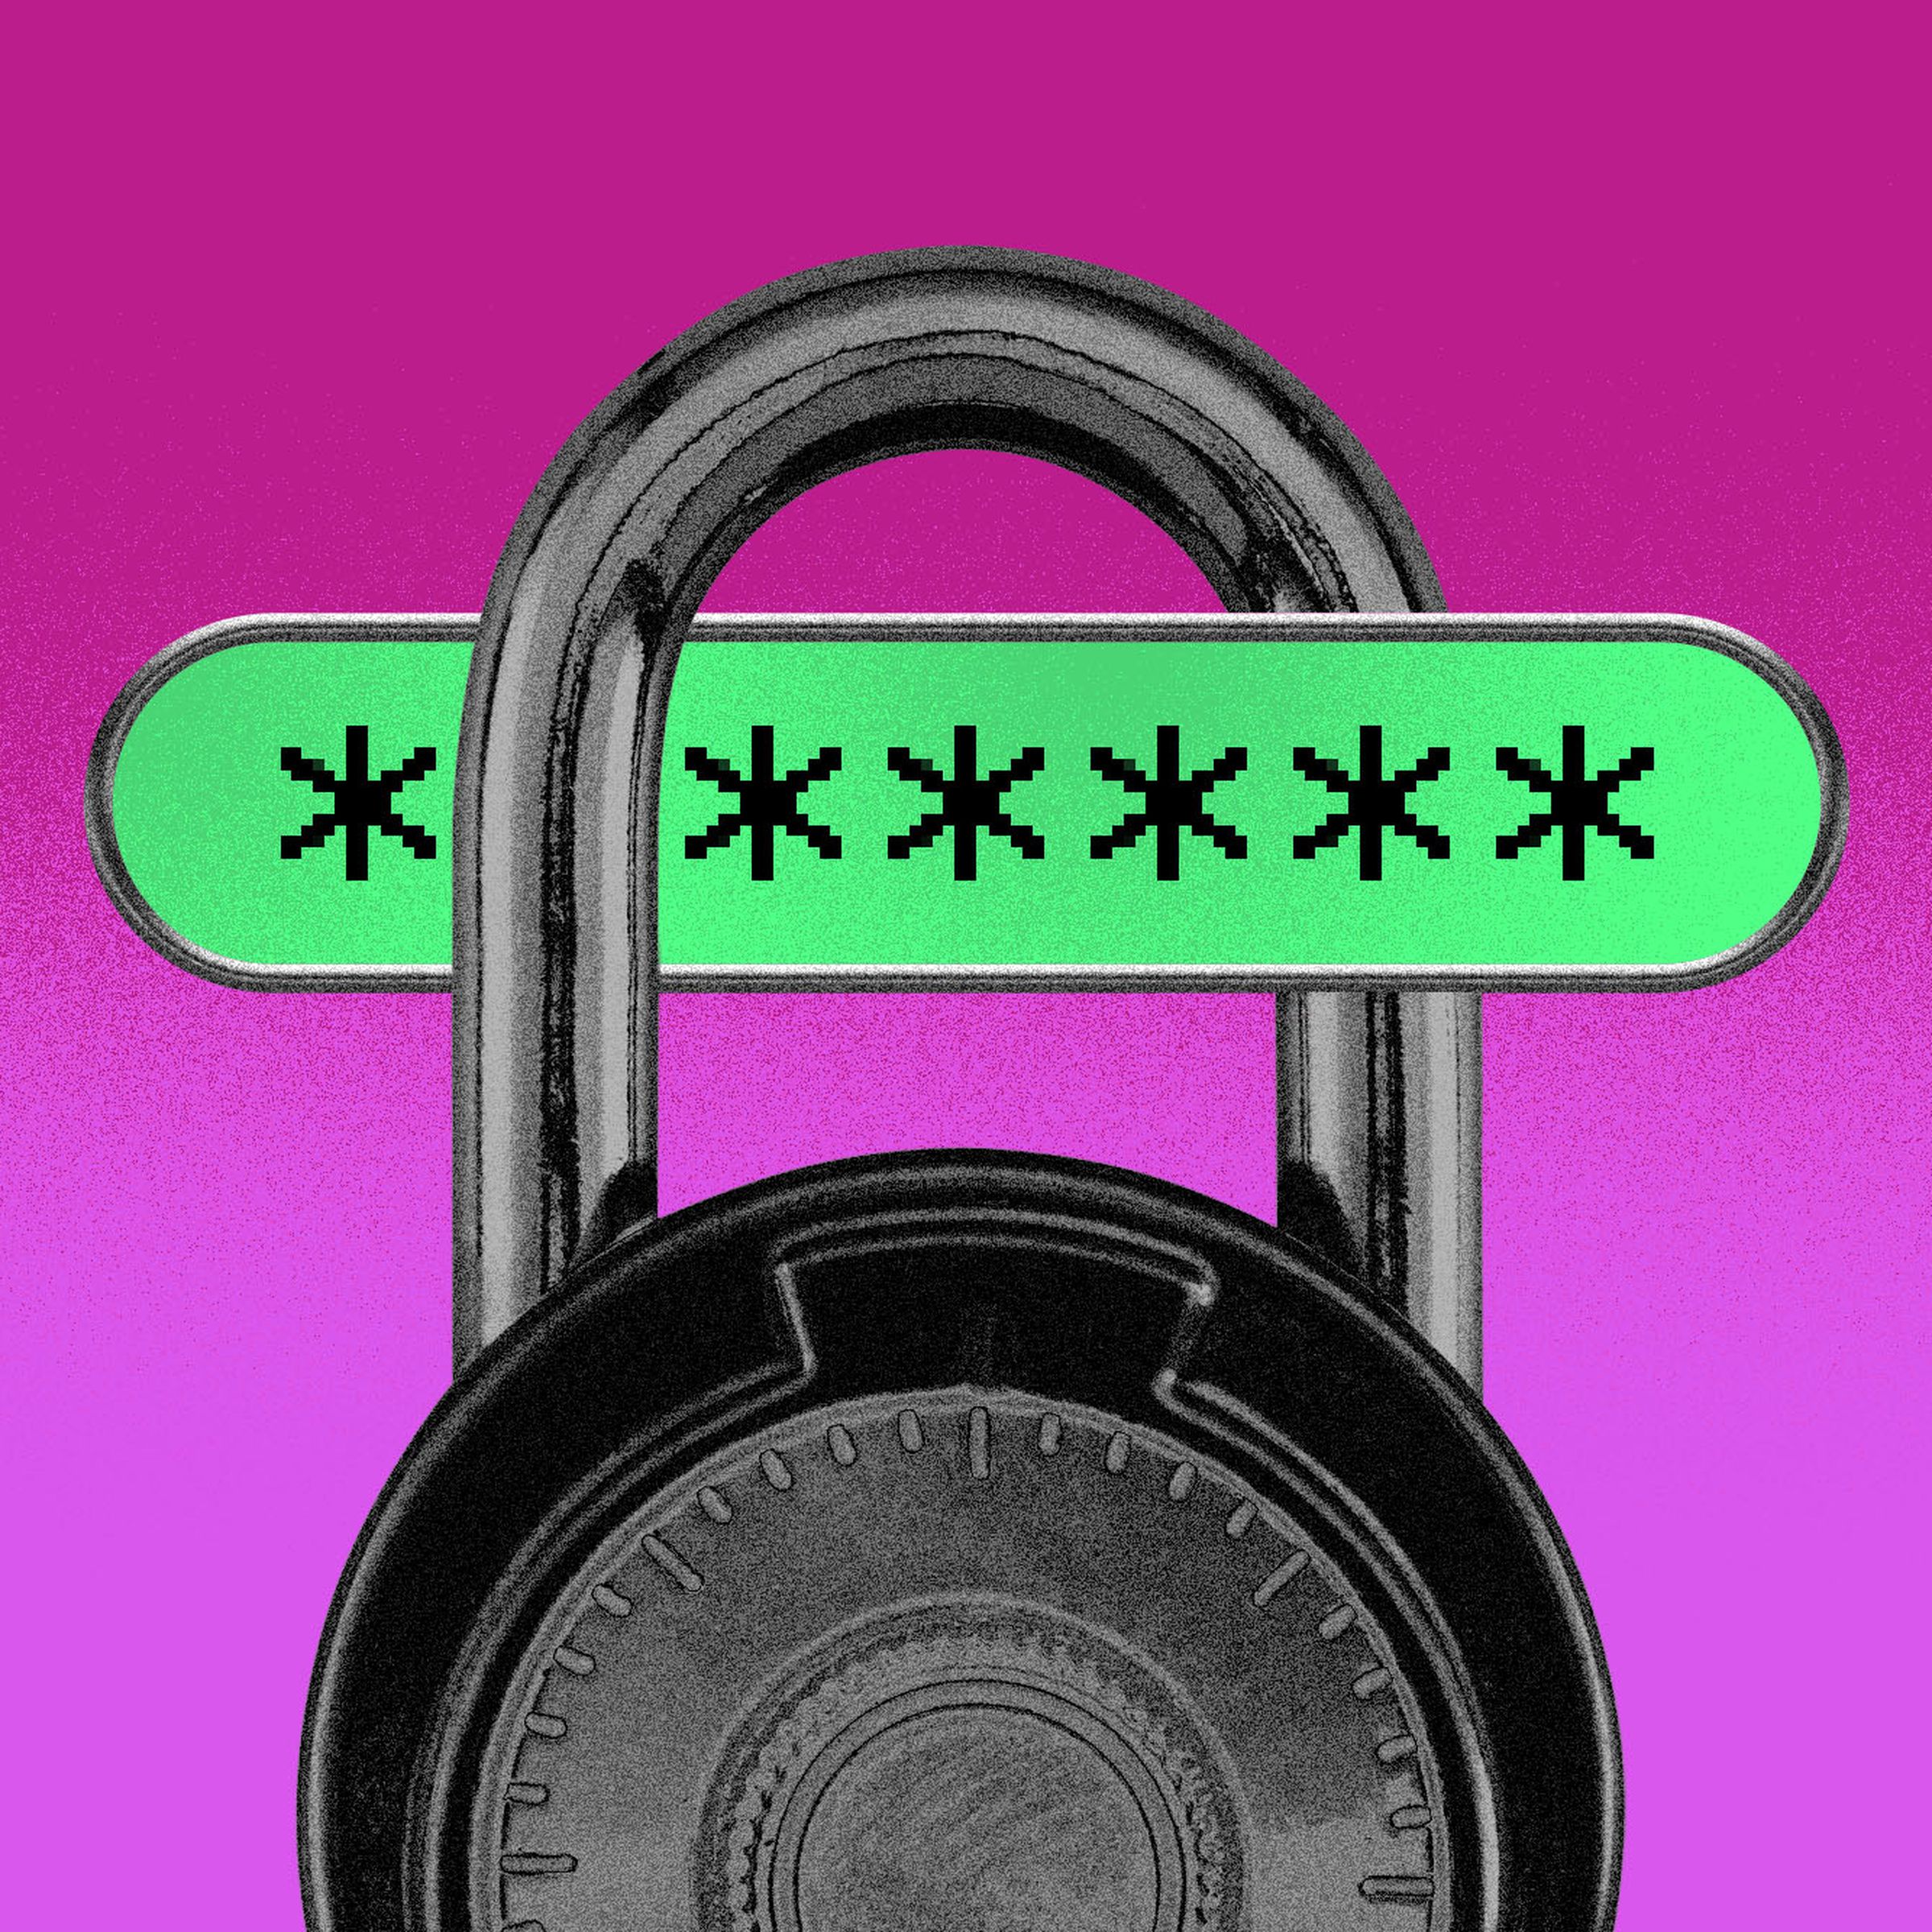 Illustration of a password above a closed combination lock.